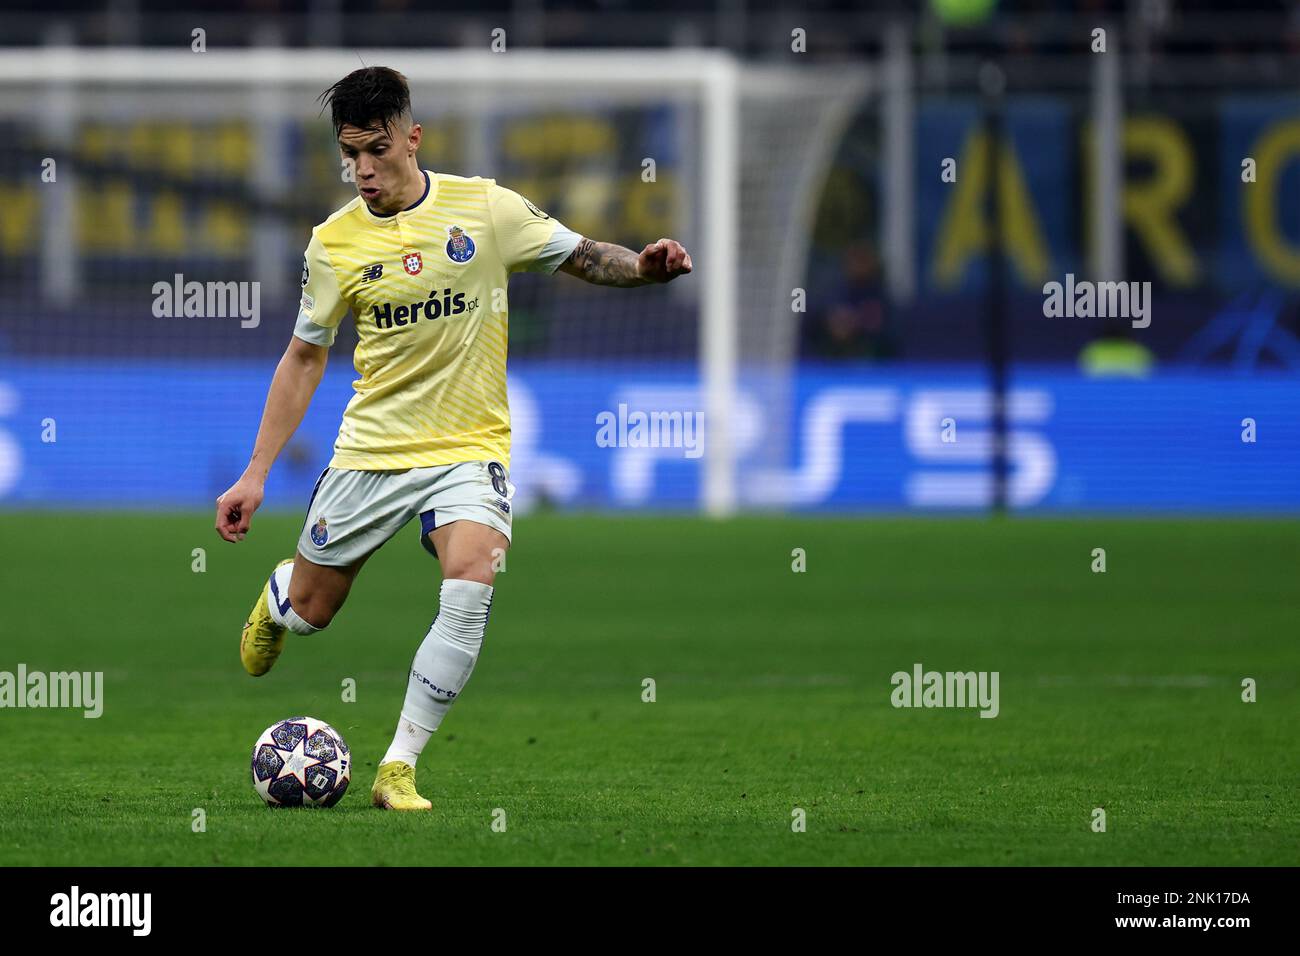 Milano Italy . February 22, 2023, Mateus Uribe of Fc Porto in action during the Uefa Europa League Group C match between Fc Internazionale and Fc Porto at Stadio Giuseppe Meazza on February 22, 2023 in Milano Italy . Stock Photo